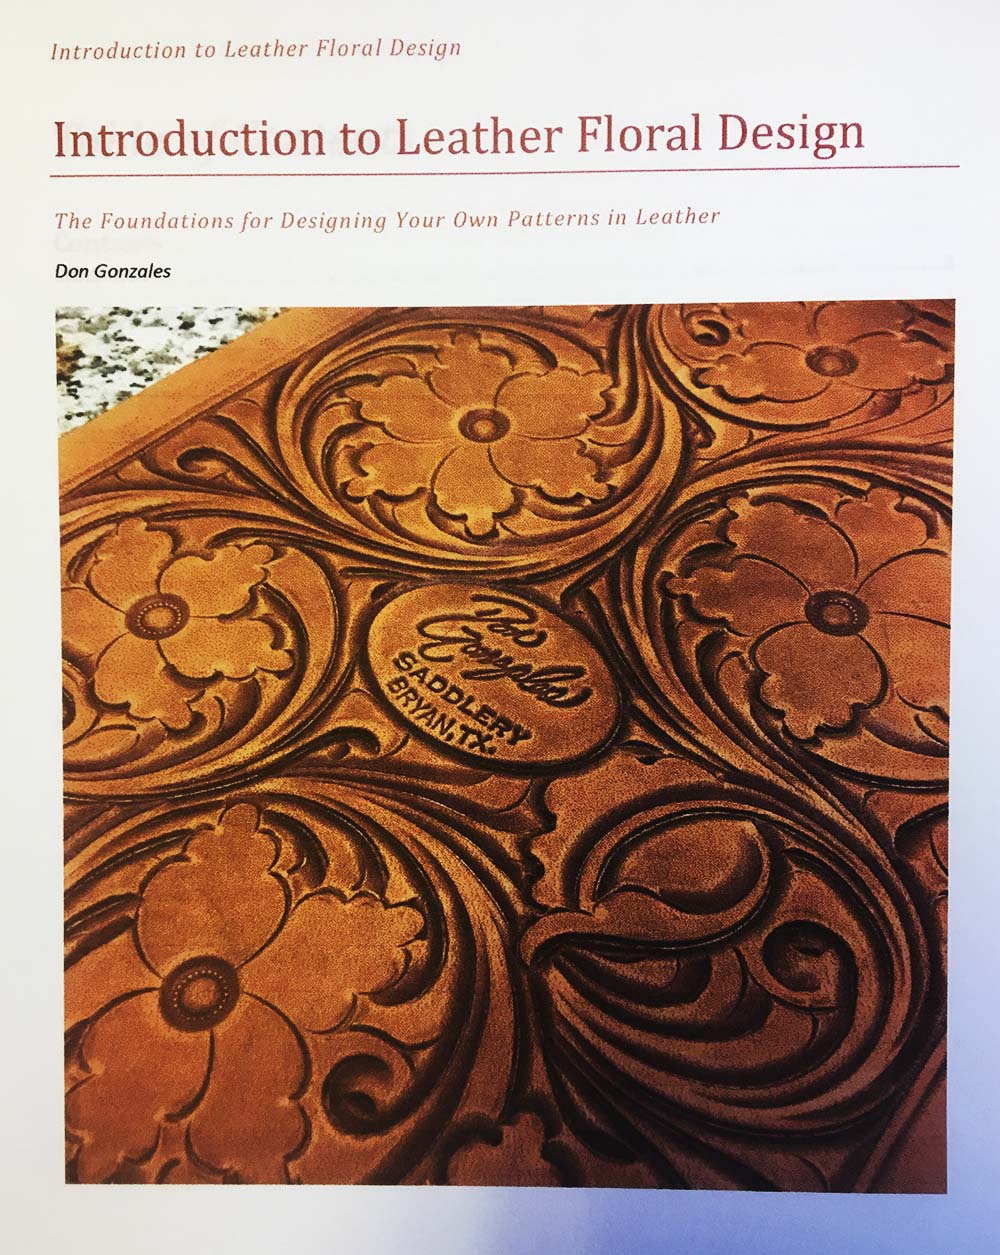 Introduction to Leather Floral Design